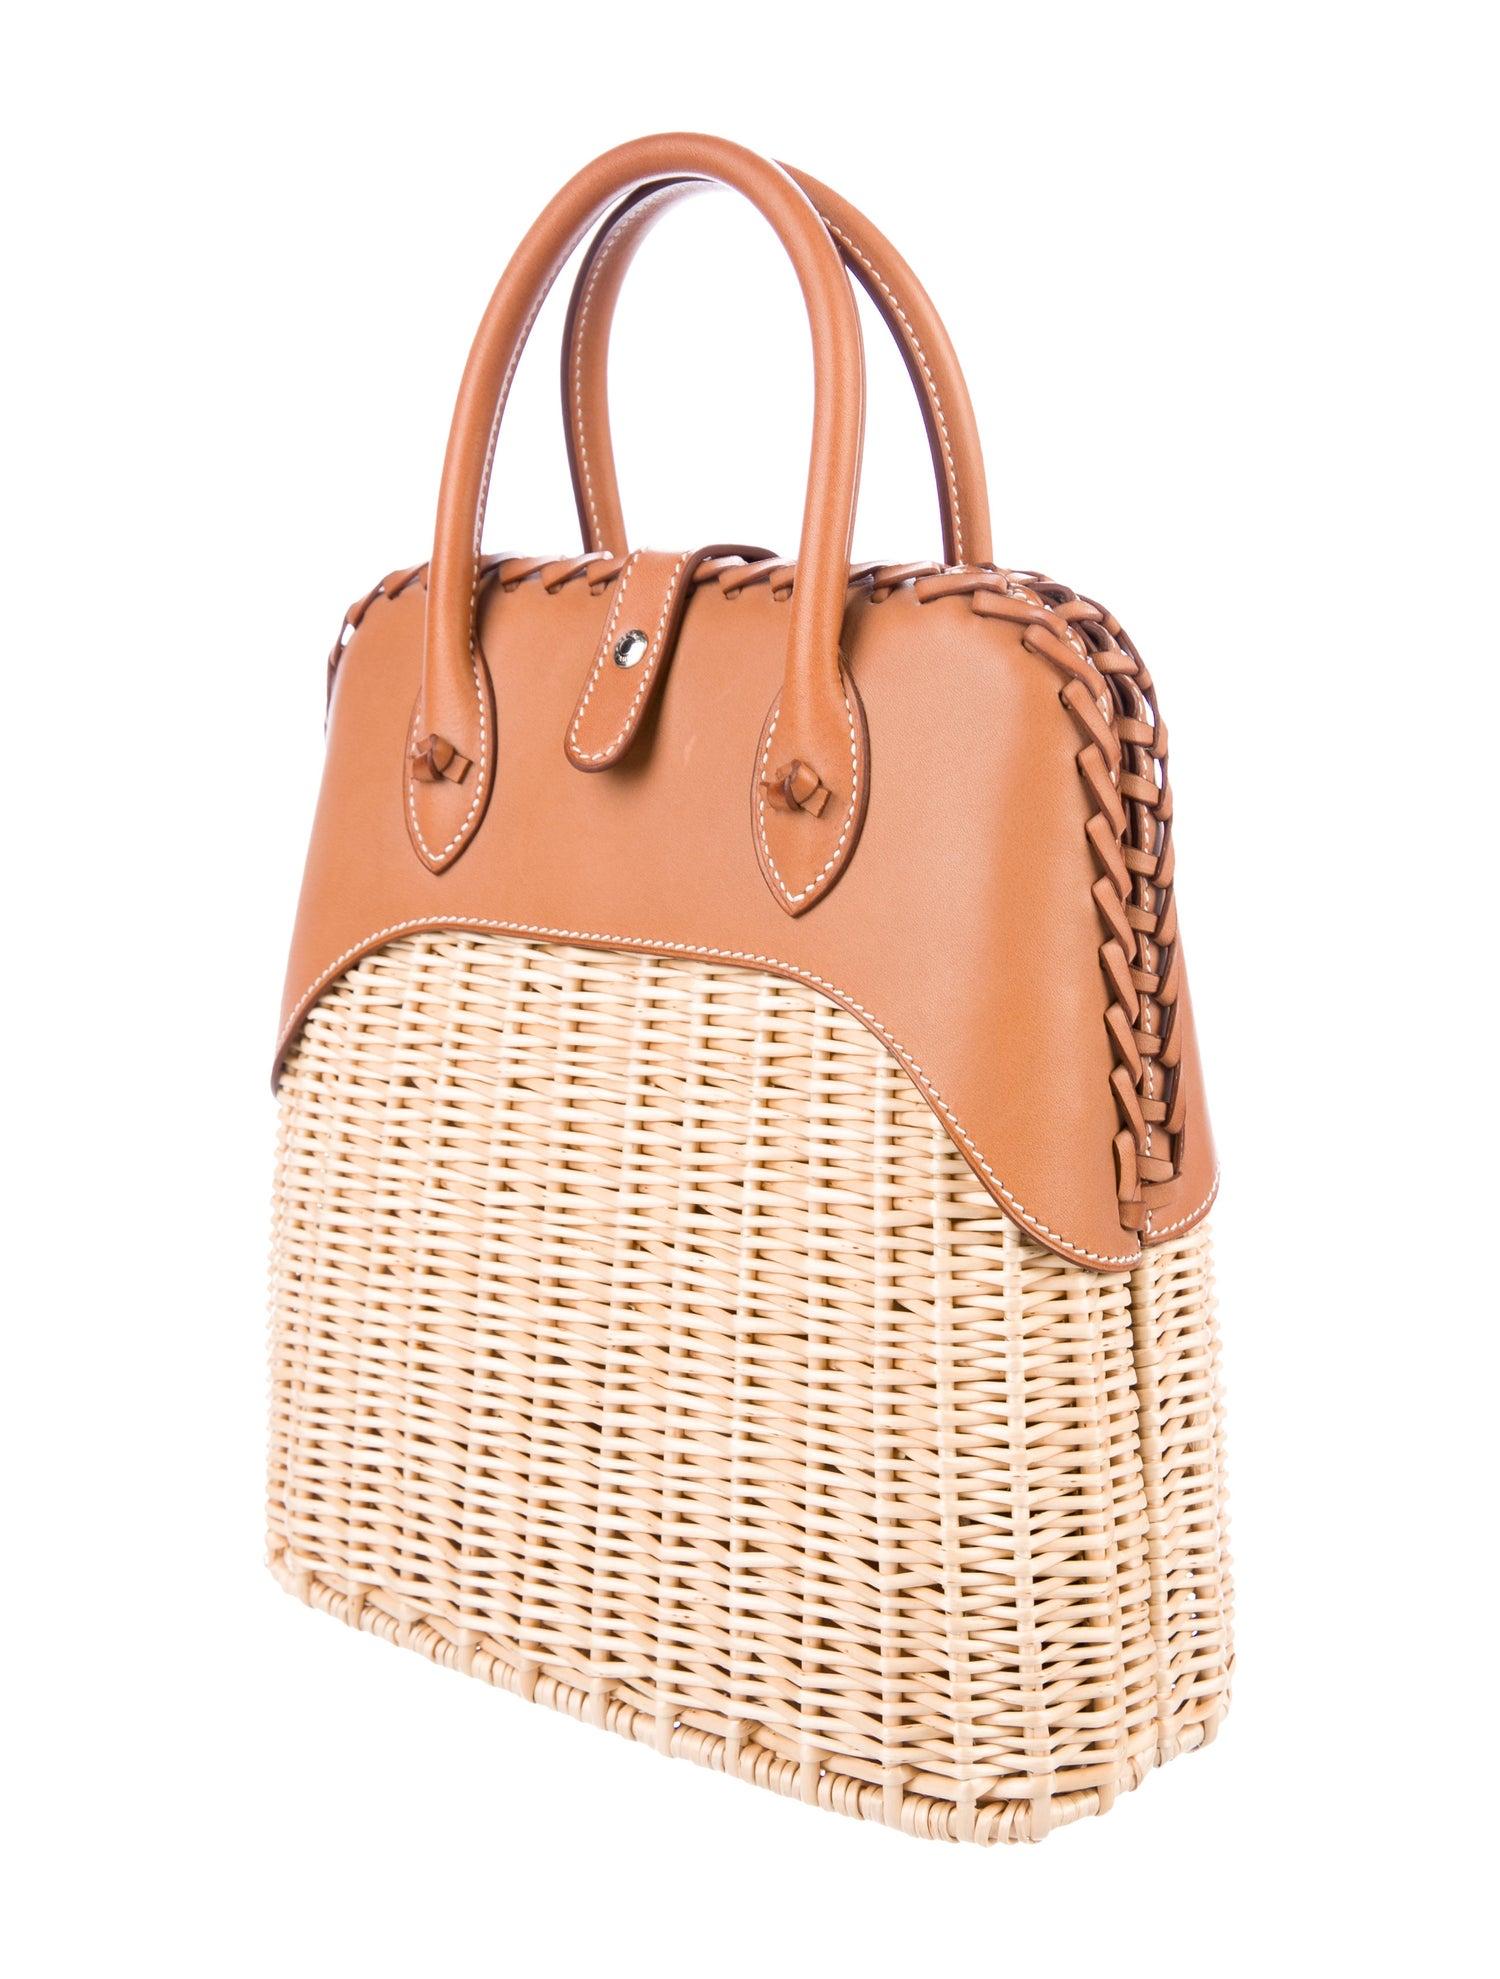 Hermes NEW Tan Wicker Basket Cognac Leather Bolide Top Handle Satchel Bag with Dust Bag & Box

Wicker
Leather
Palladium plated hardware
Leather lining
Snap closure
Made in France
Handle drop 3.25